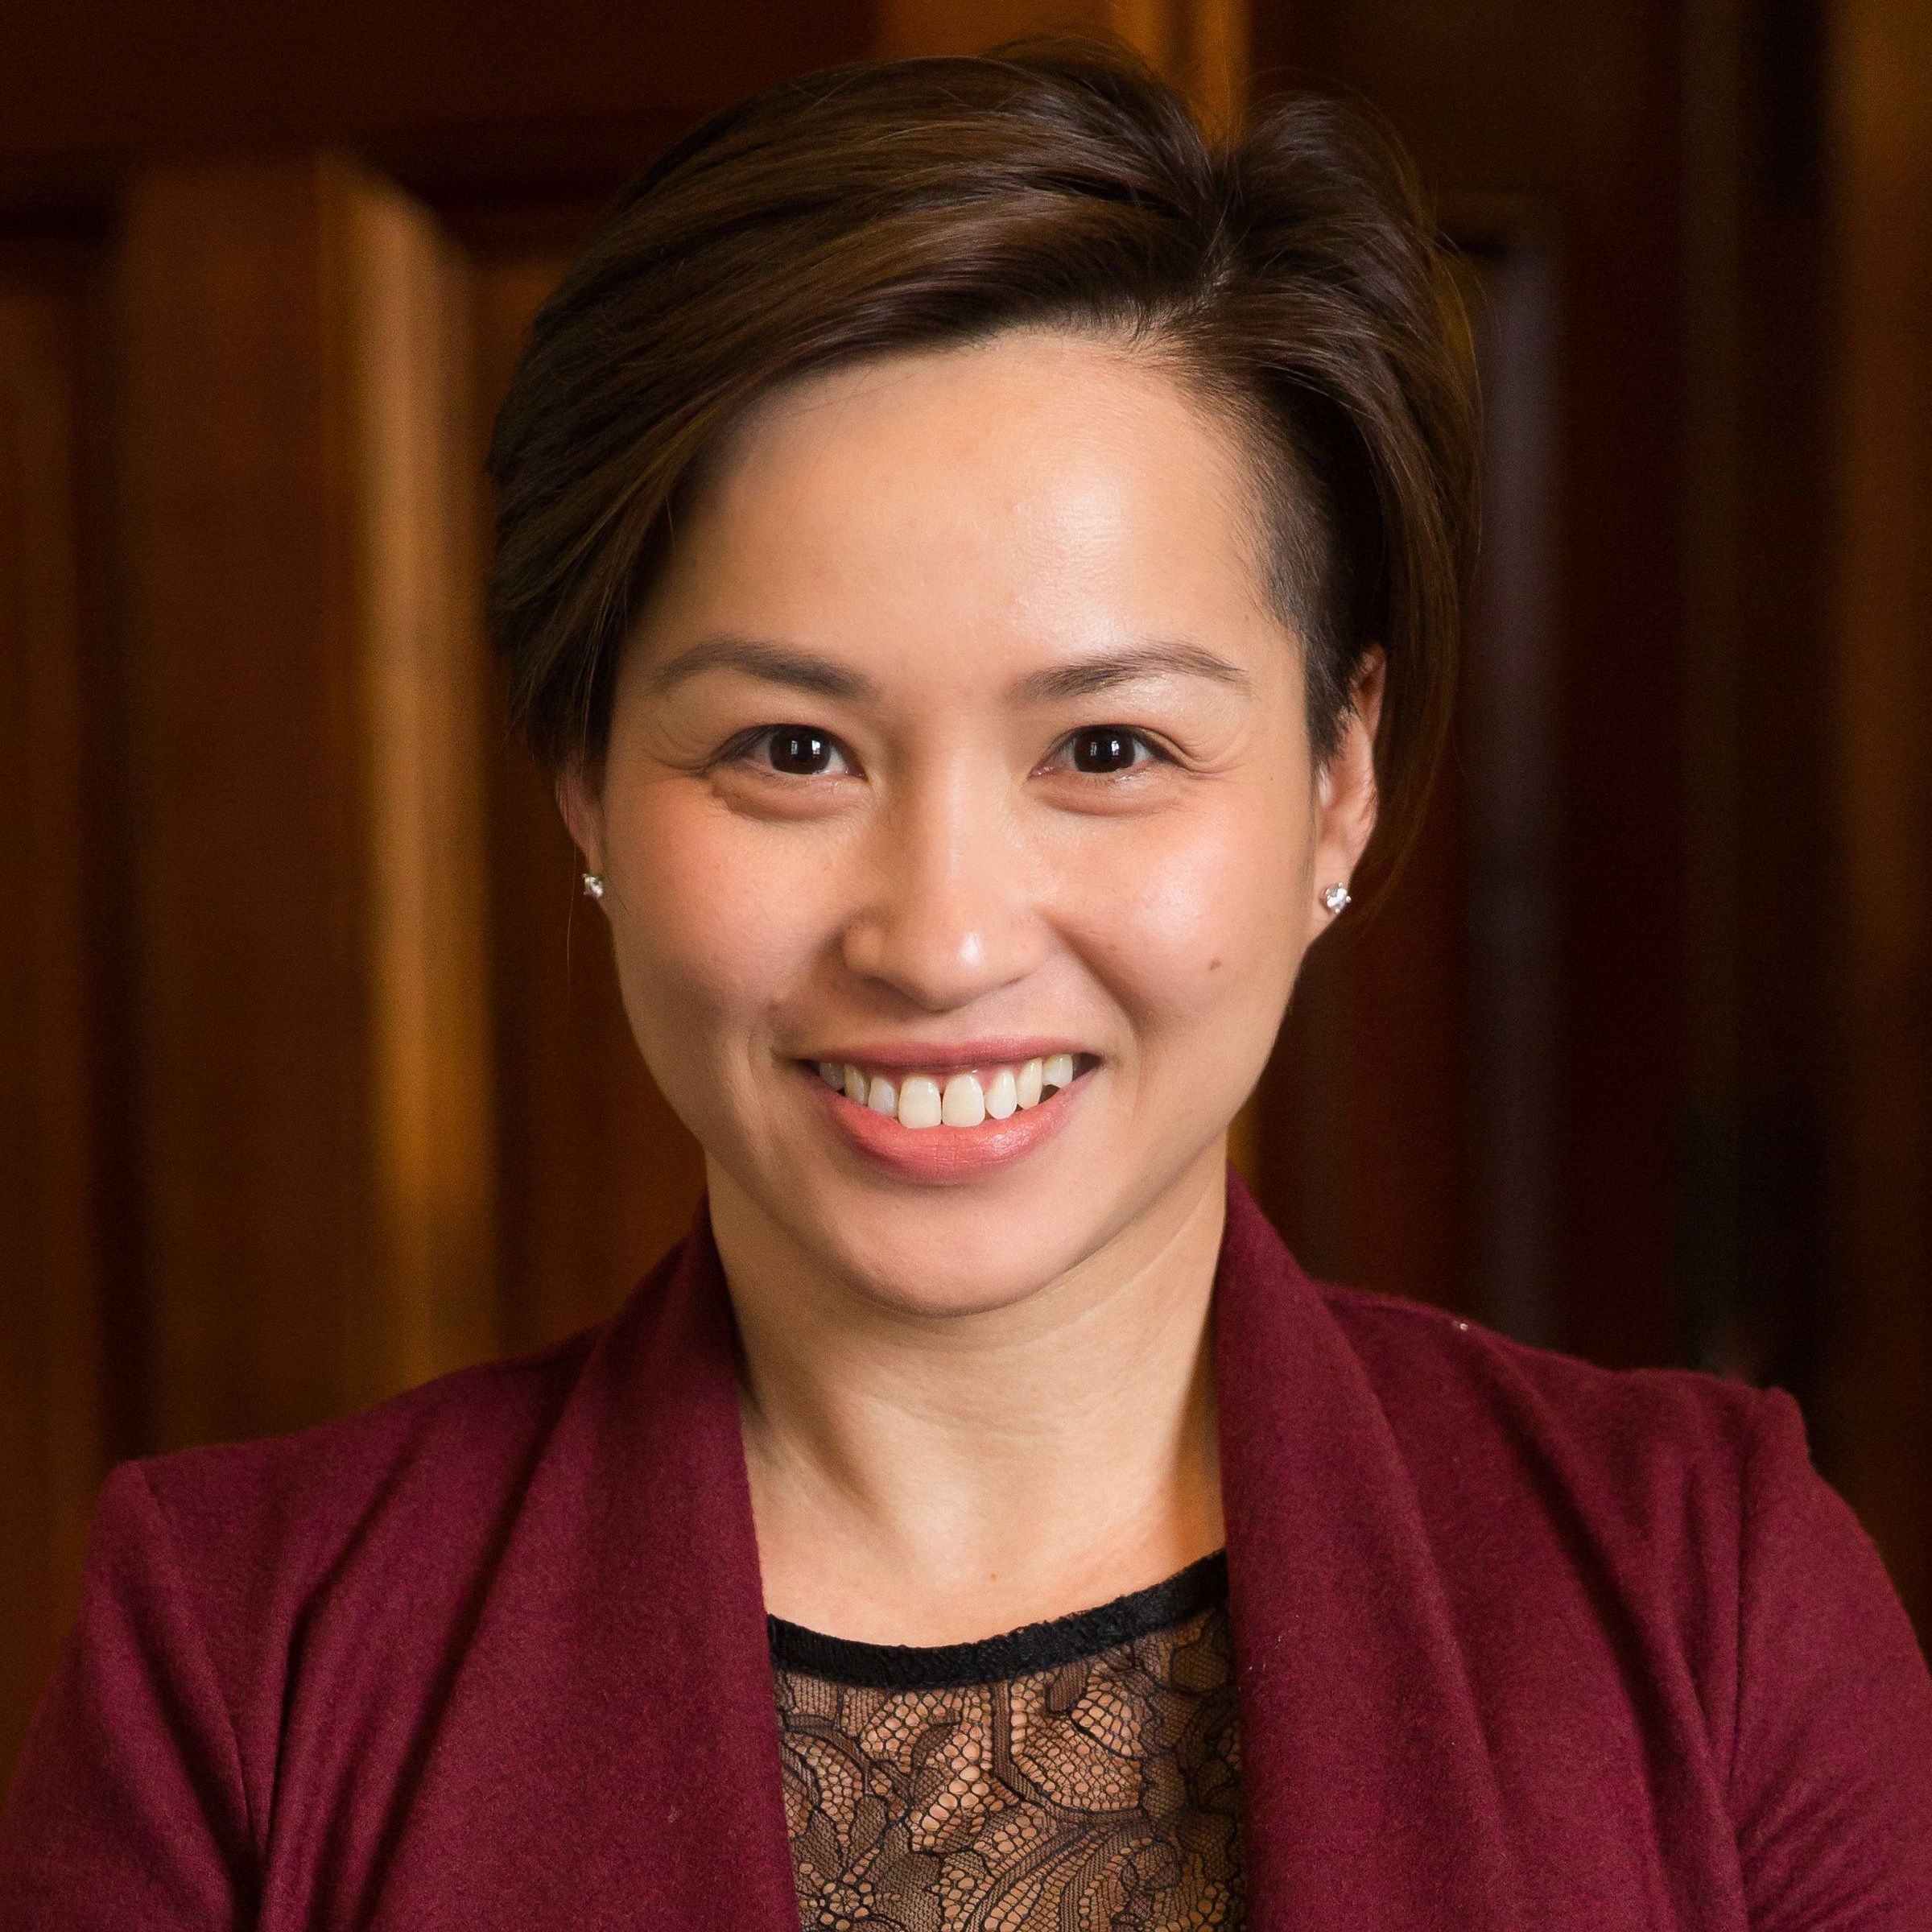 Asian woman with short hair and red blazer smiles against dark background.